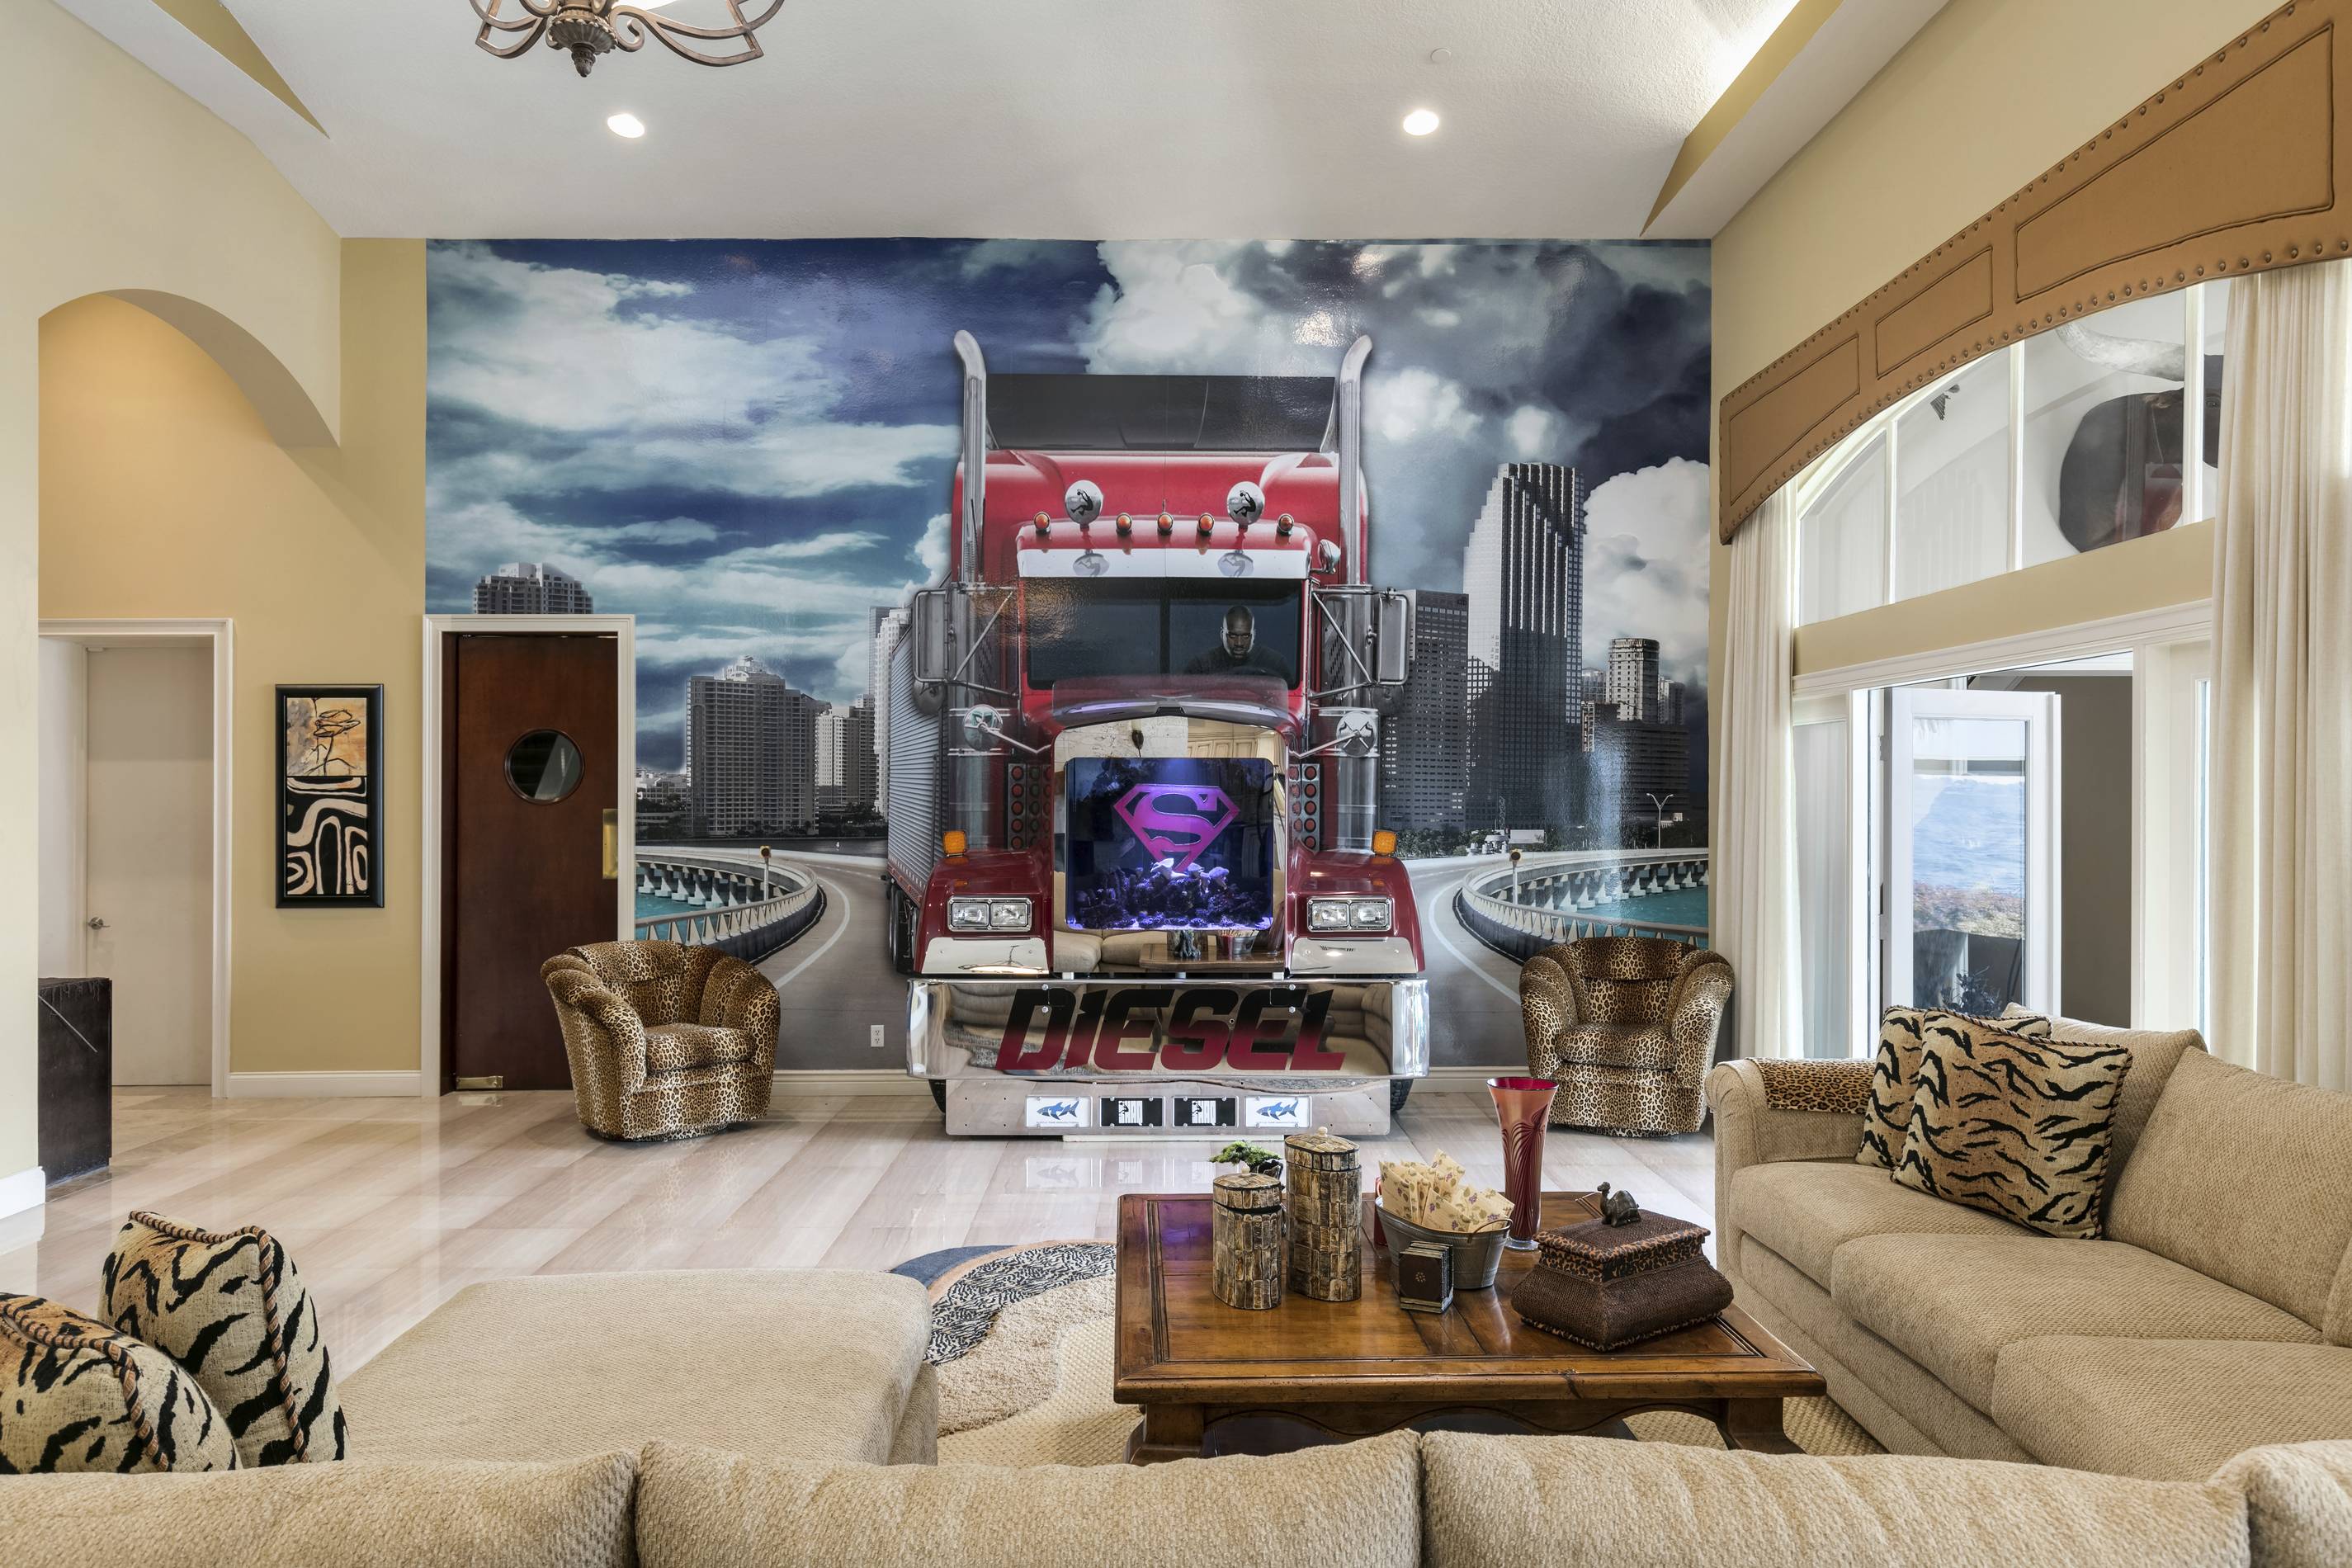 Shaq house in Florida, living room